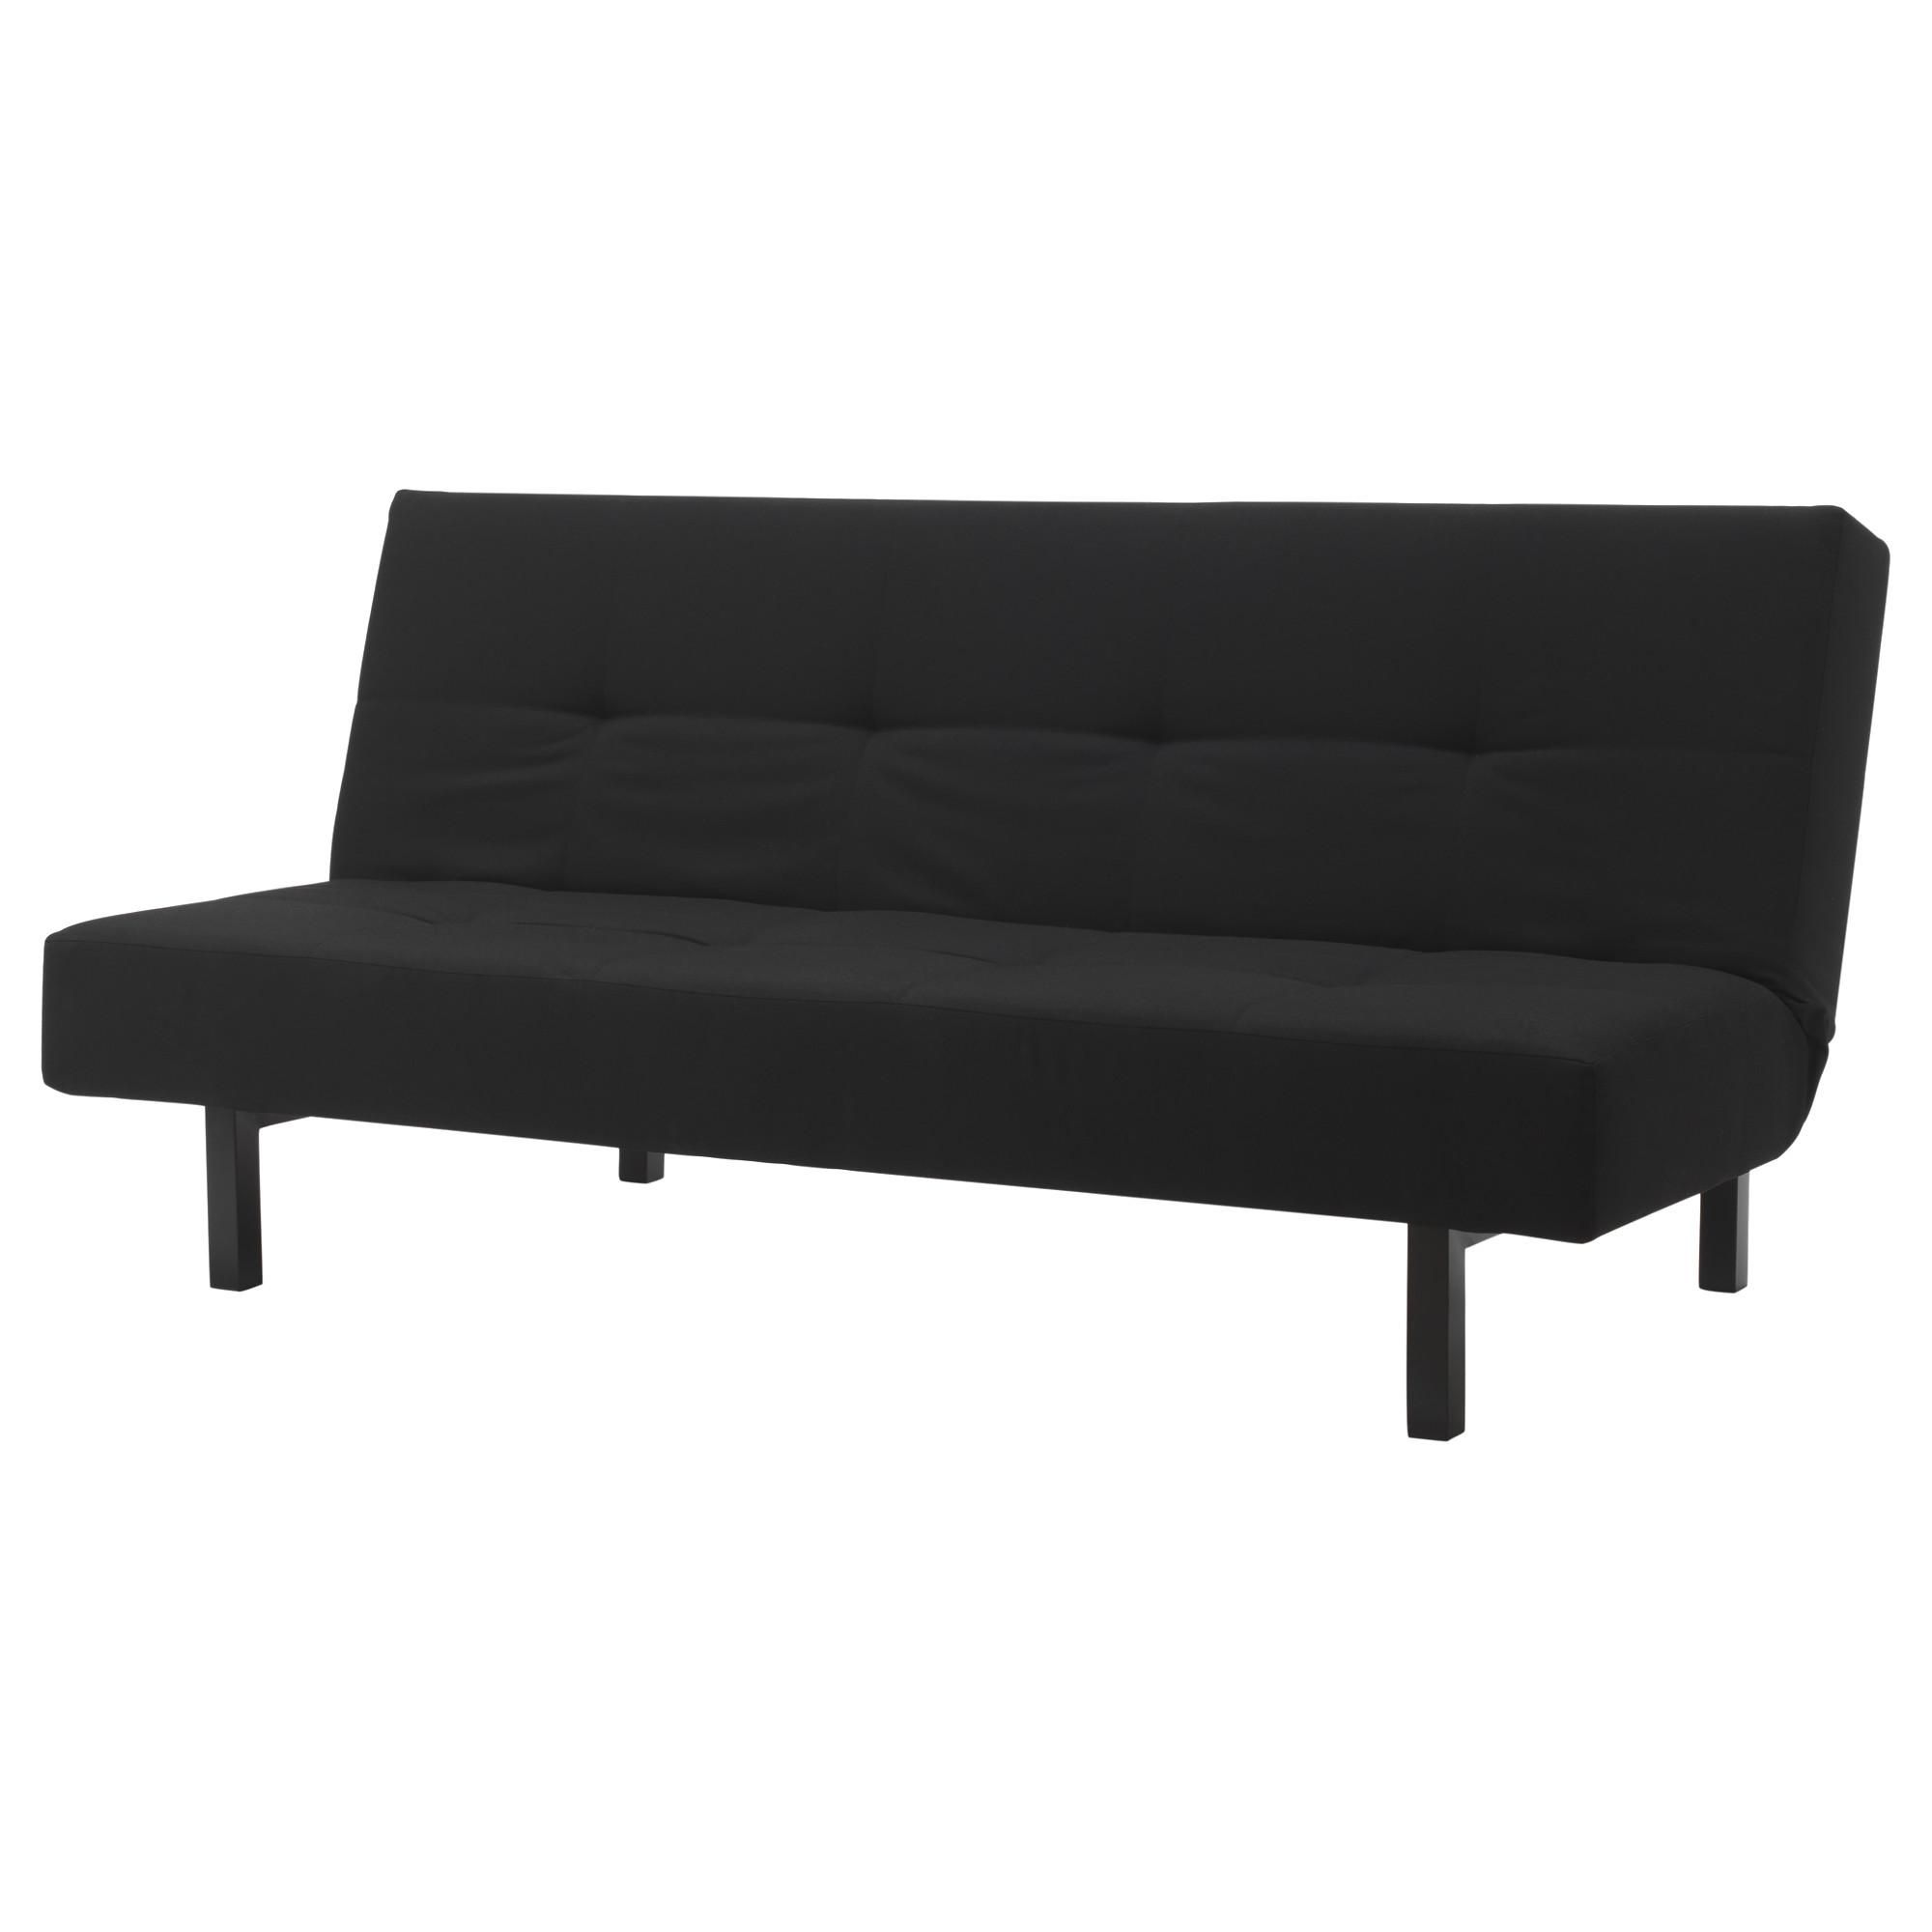 Sleeper Sofas & Chair Beds – Ikea Intended For Sofa Beds Chairs (View 5 of 20)